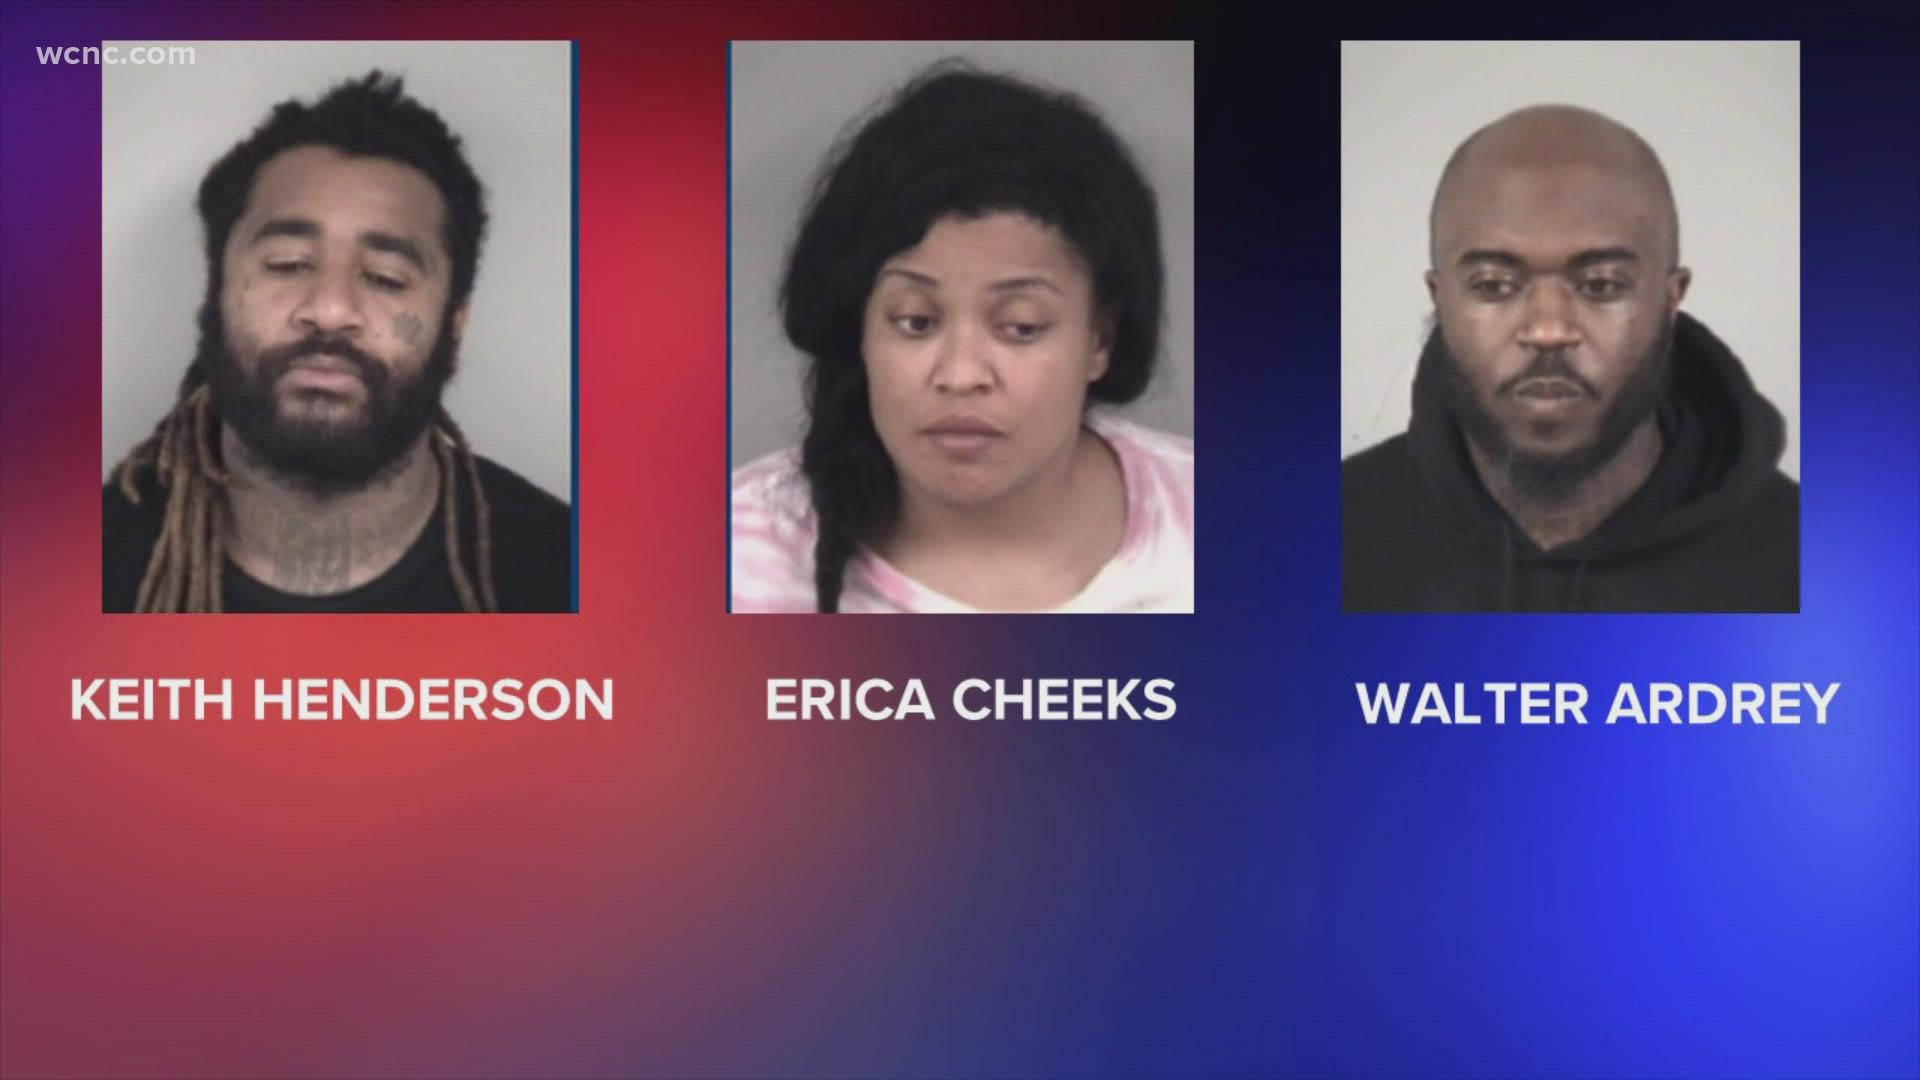 The three people arrested are accused of being involved in trafficking a teenage girl for sex in the Concord Mills area.